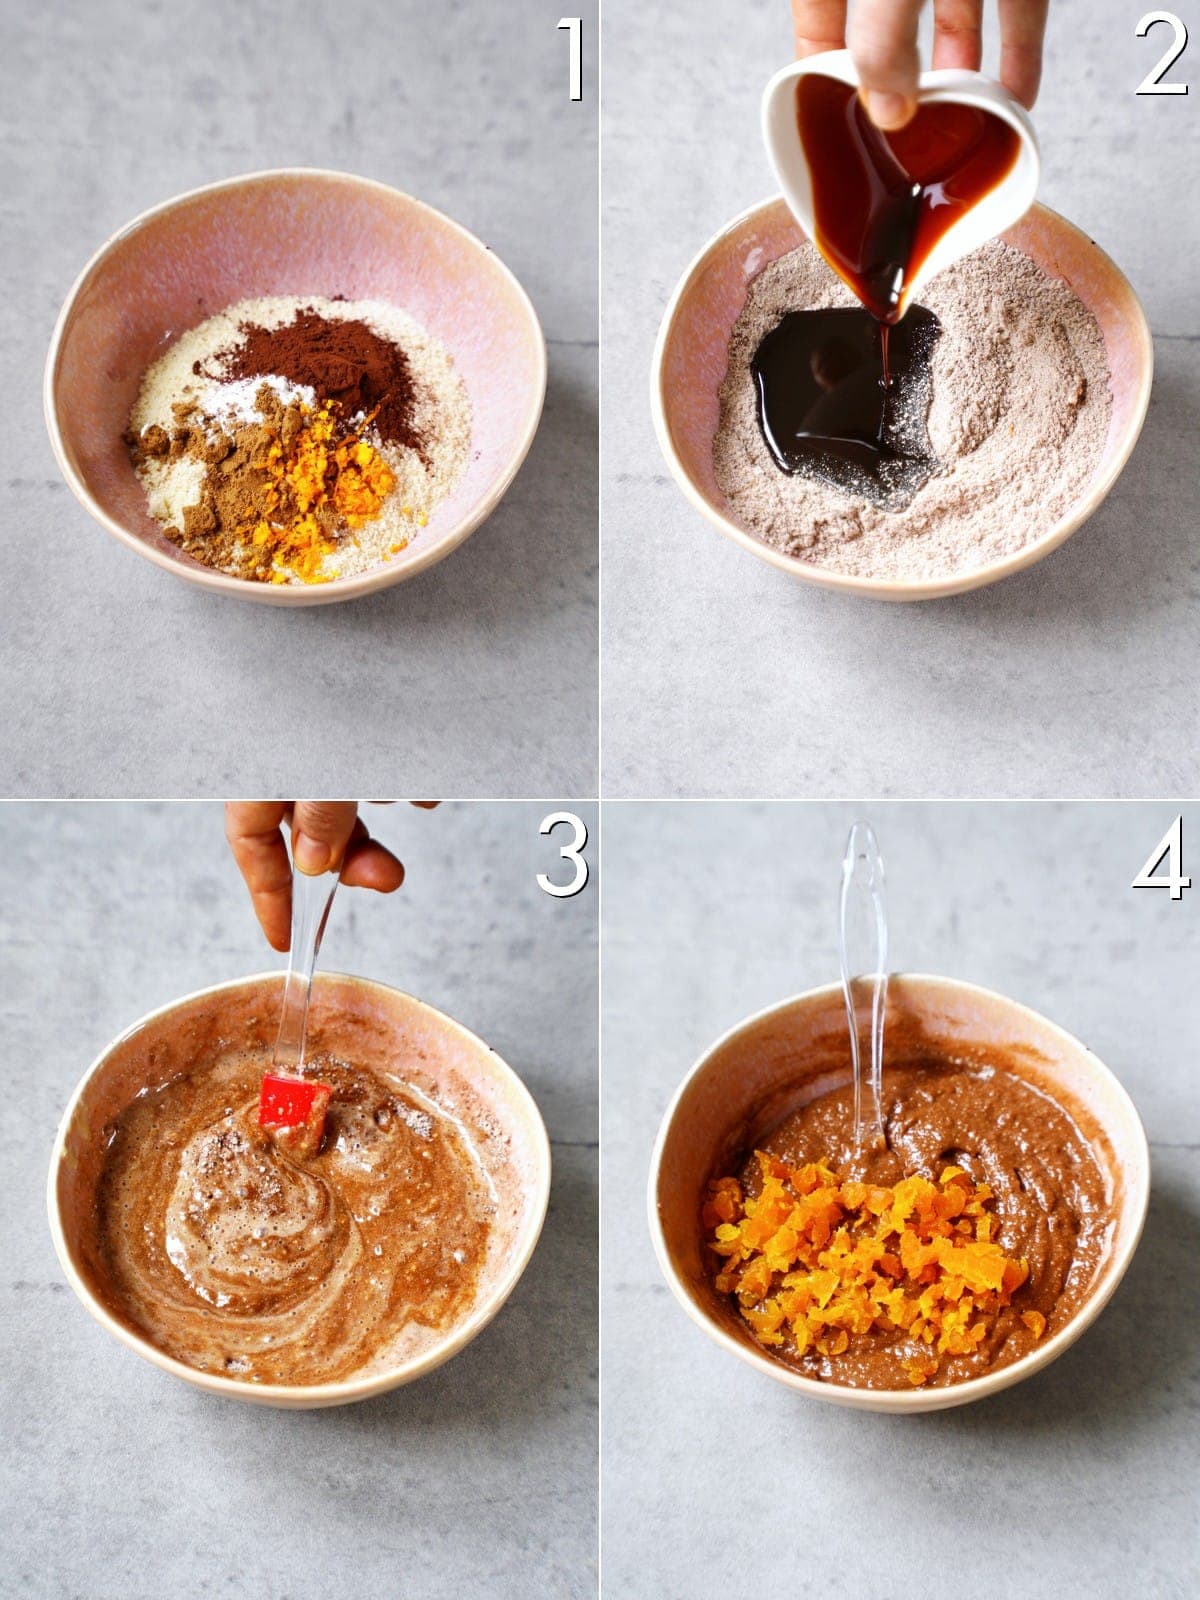 4 pics showing how to make gingerbread cookie dough